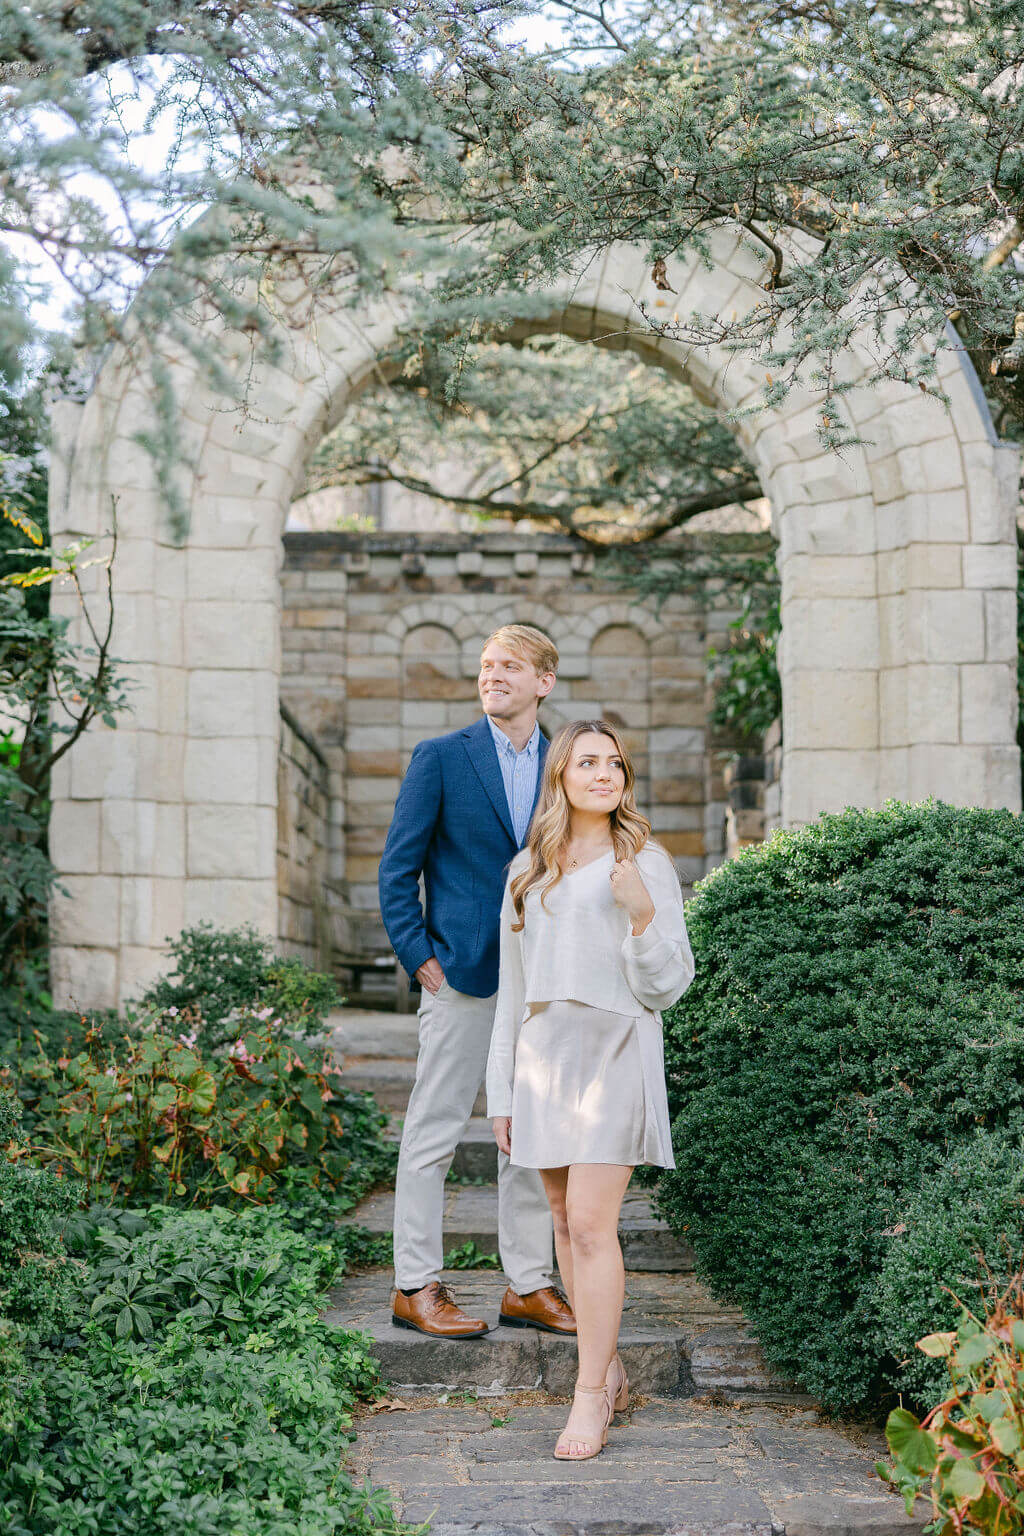 Capturing a Lovely Engagement Session at the Washingtons National Cathedral with Joan and Richard by Get Ready Photo 19